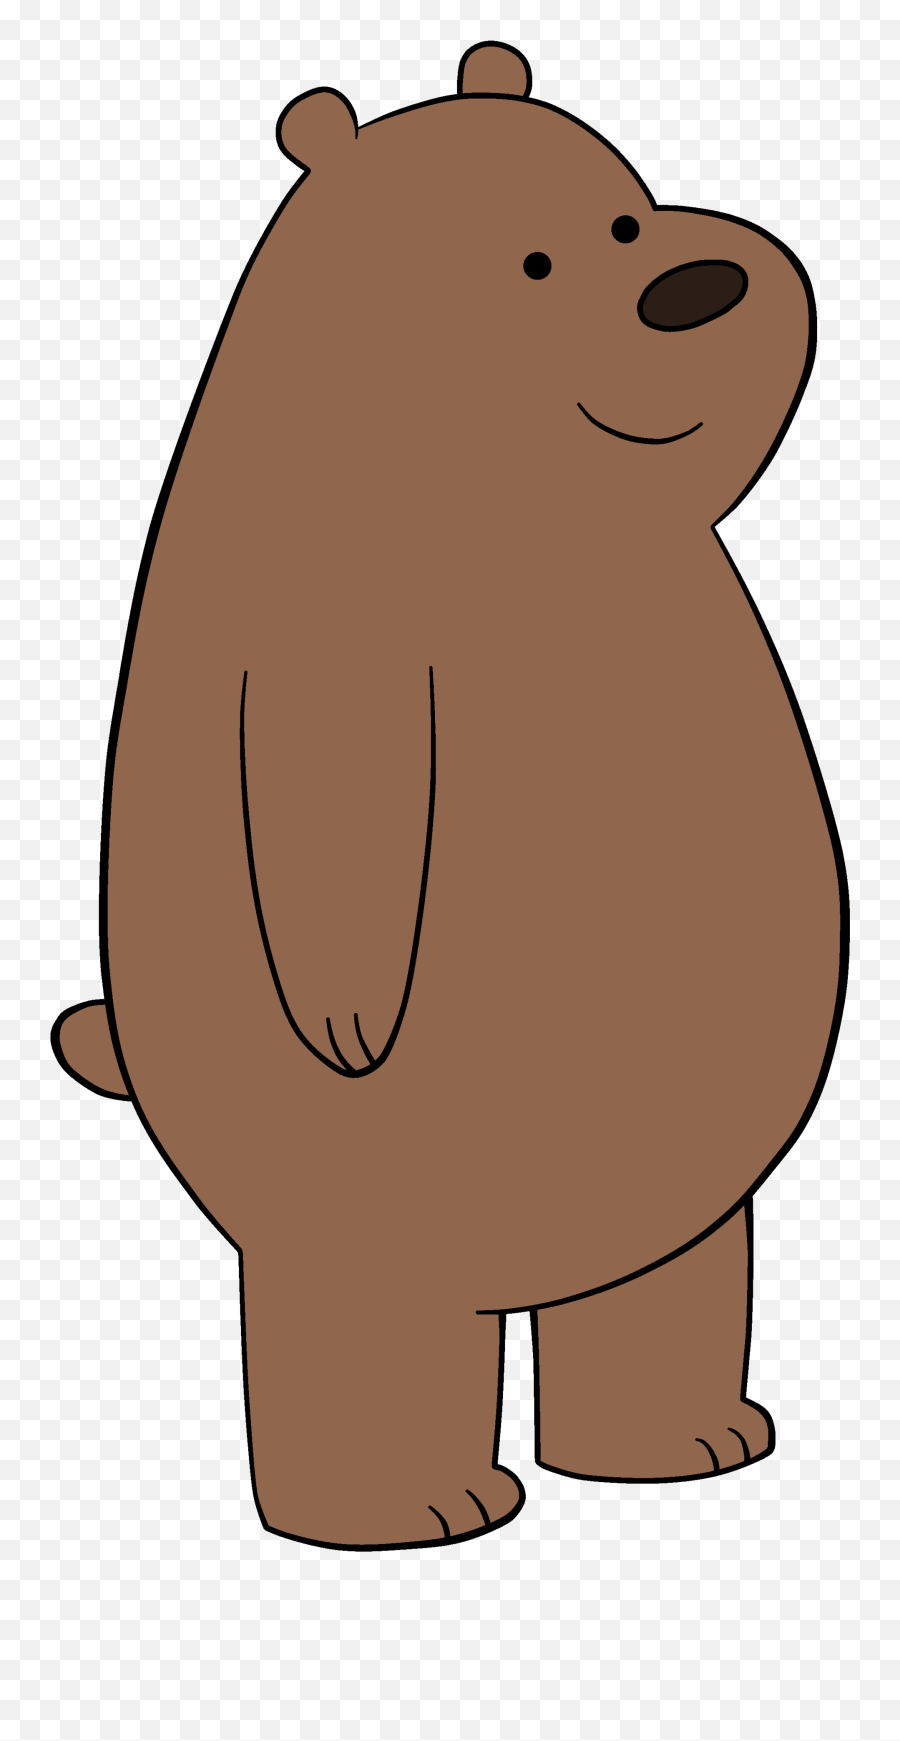 Grizzly - We Bare Bears Drawing Grizzly Emoji,Grizzly Bear Png